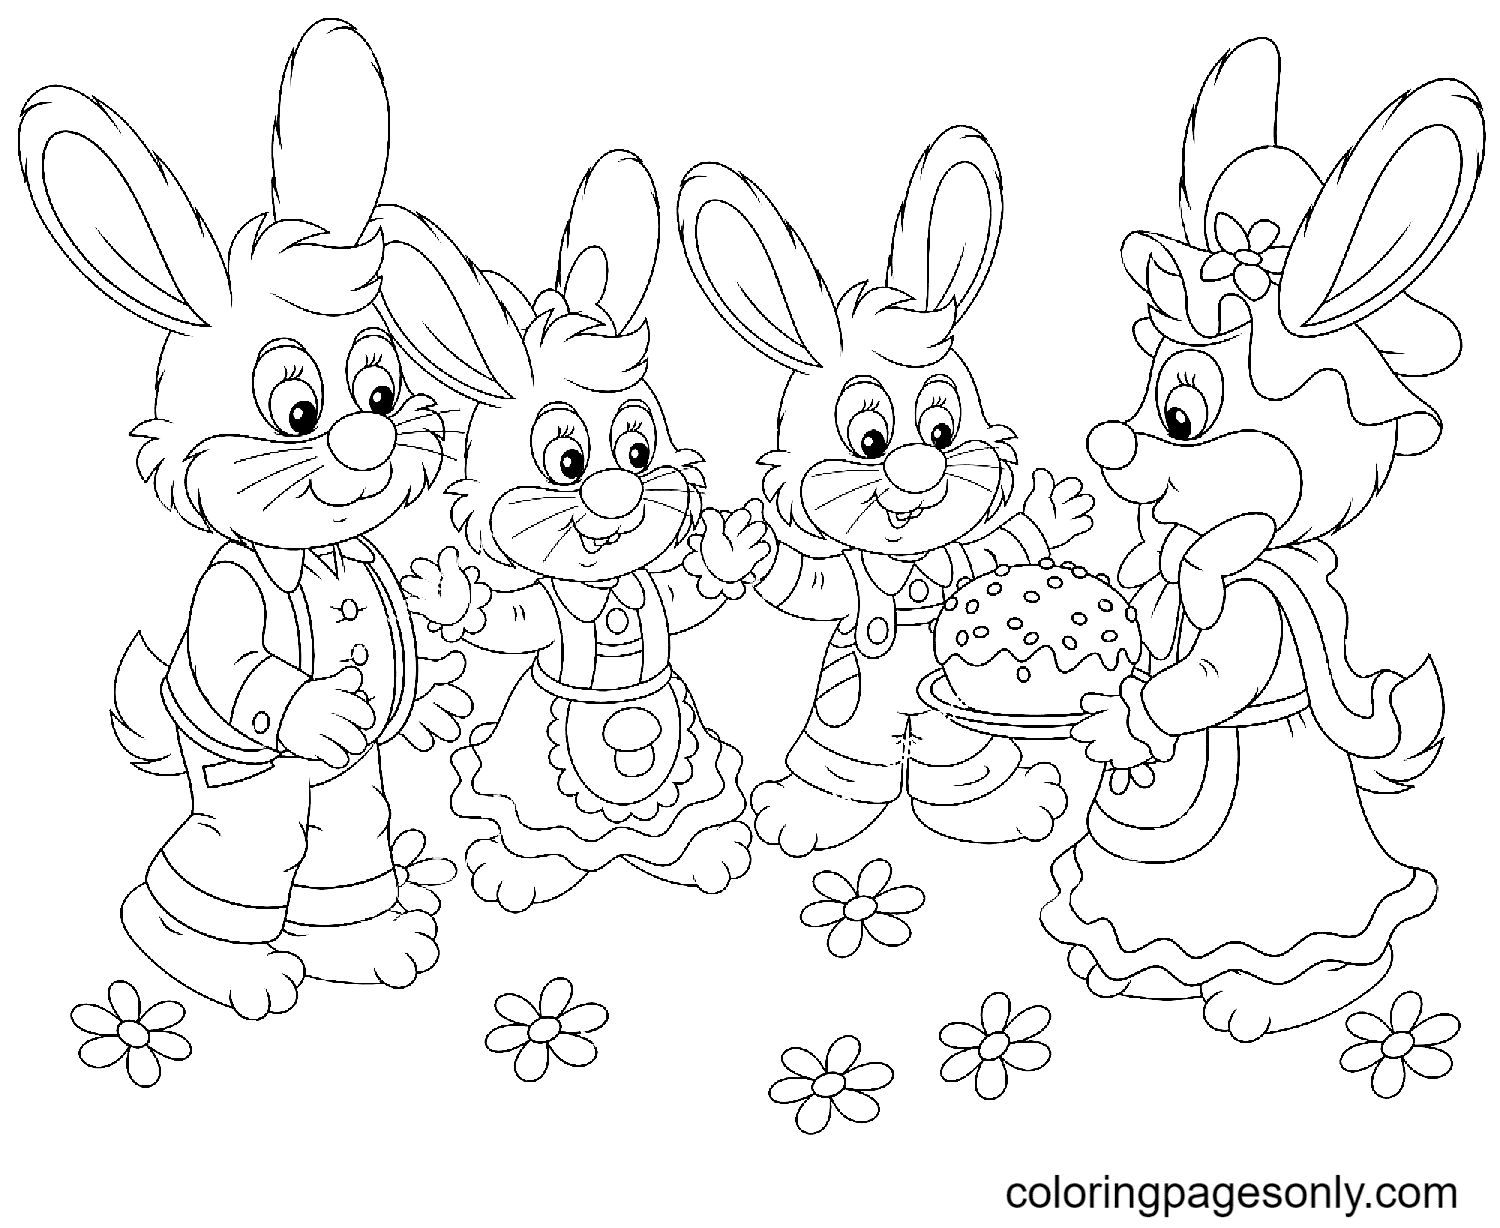 Bunnies With An Easter Cake Coloring Pages